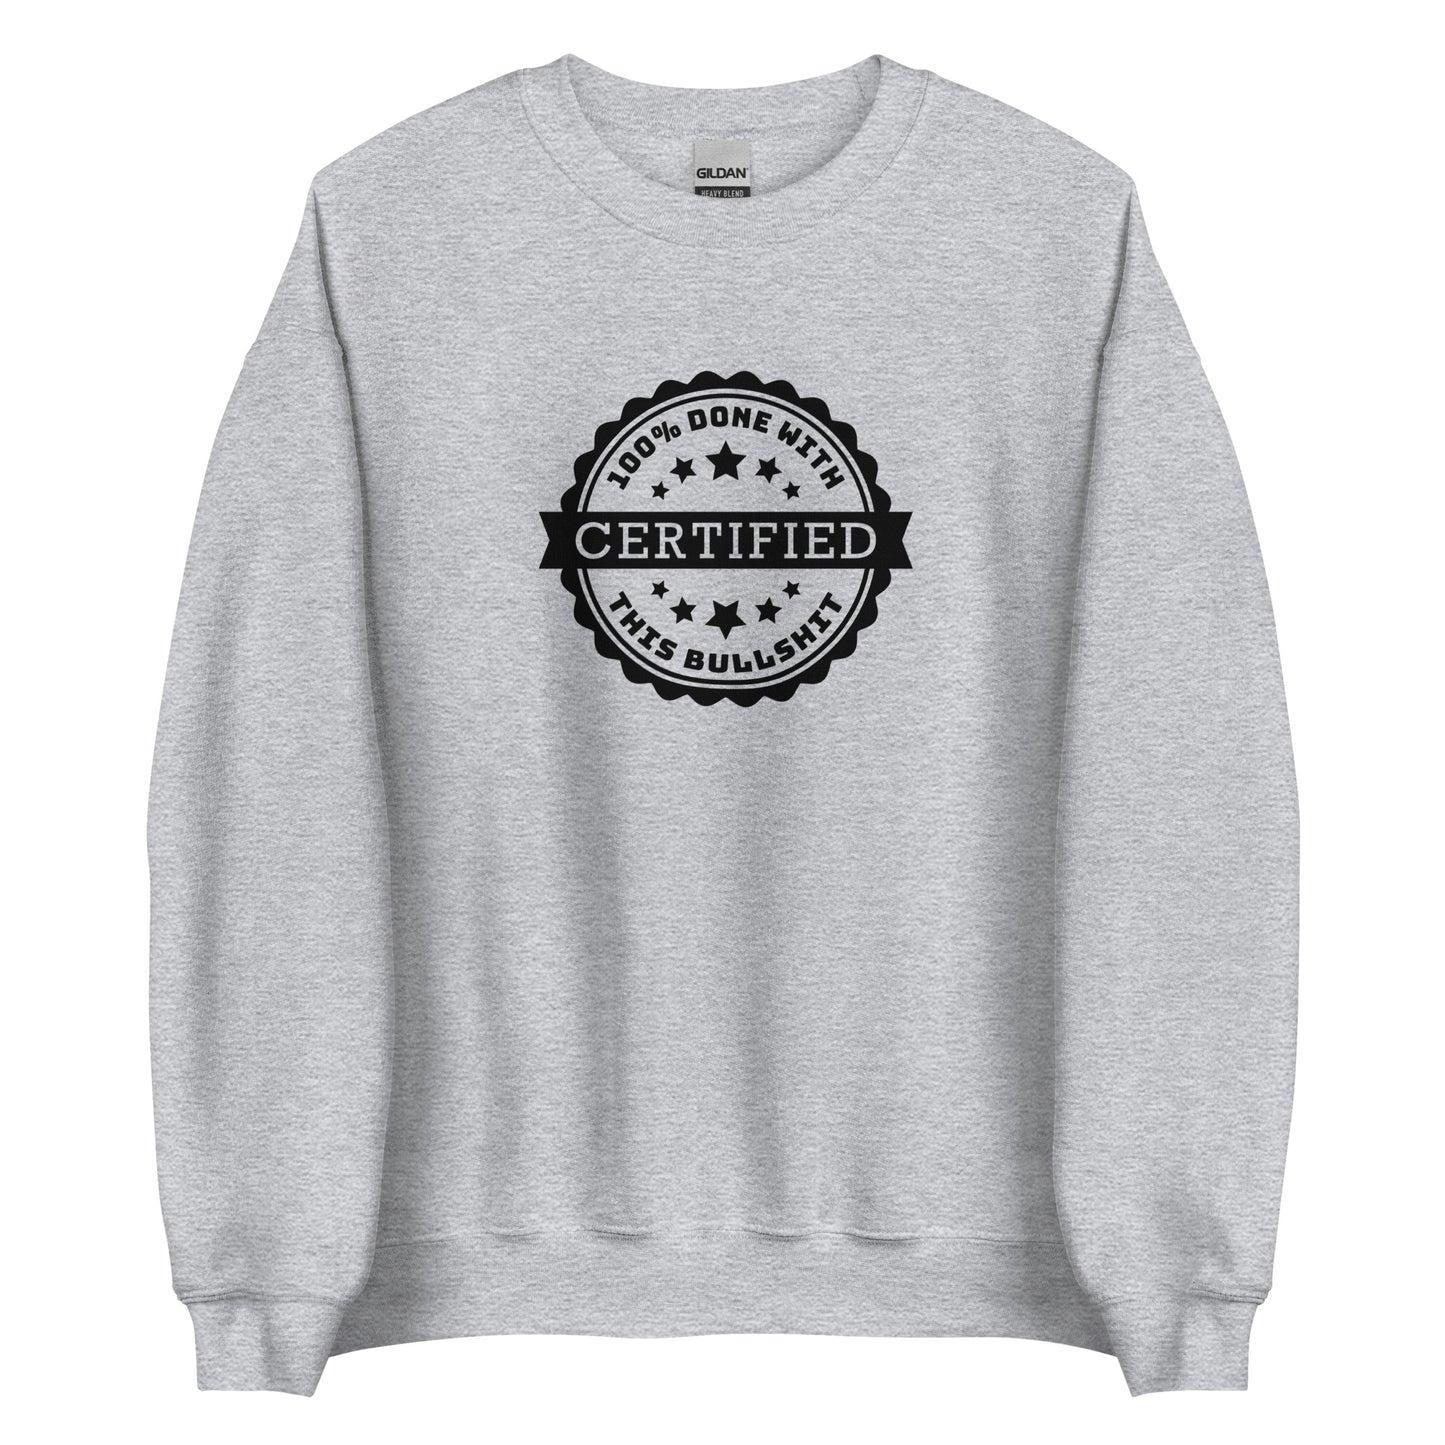 A grey crewneck sweatshirt featuring a graphic of an official-looking stamped seal. Text on the seal reads: "CERTIFIED: 100% done with this bullshit"